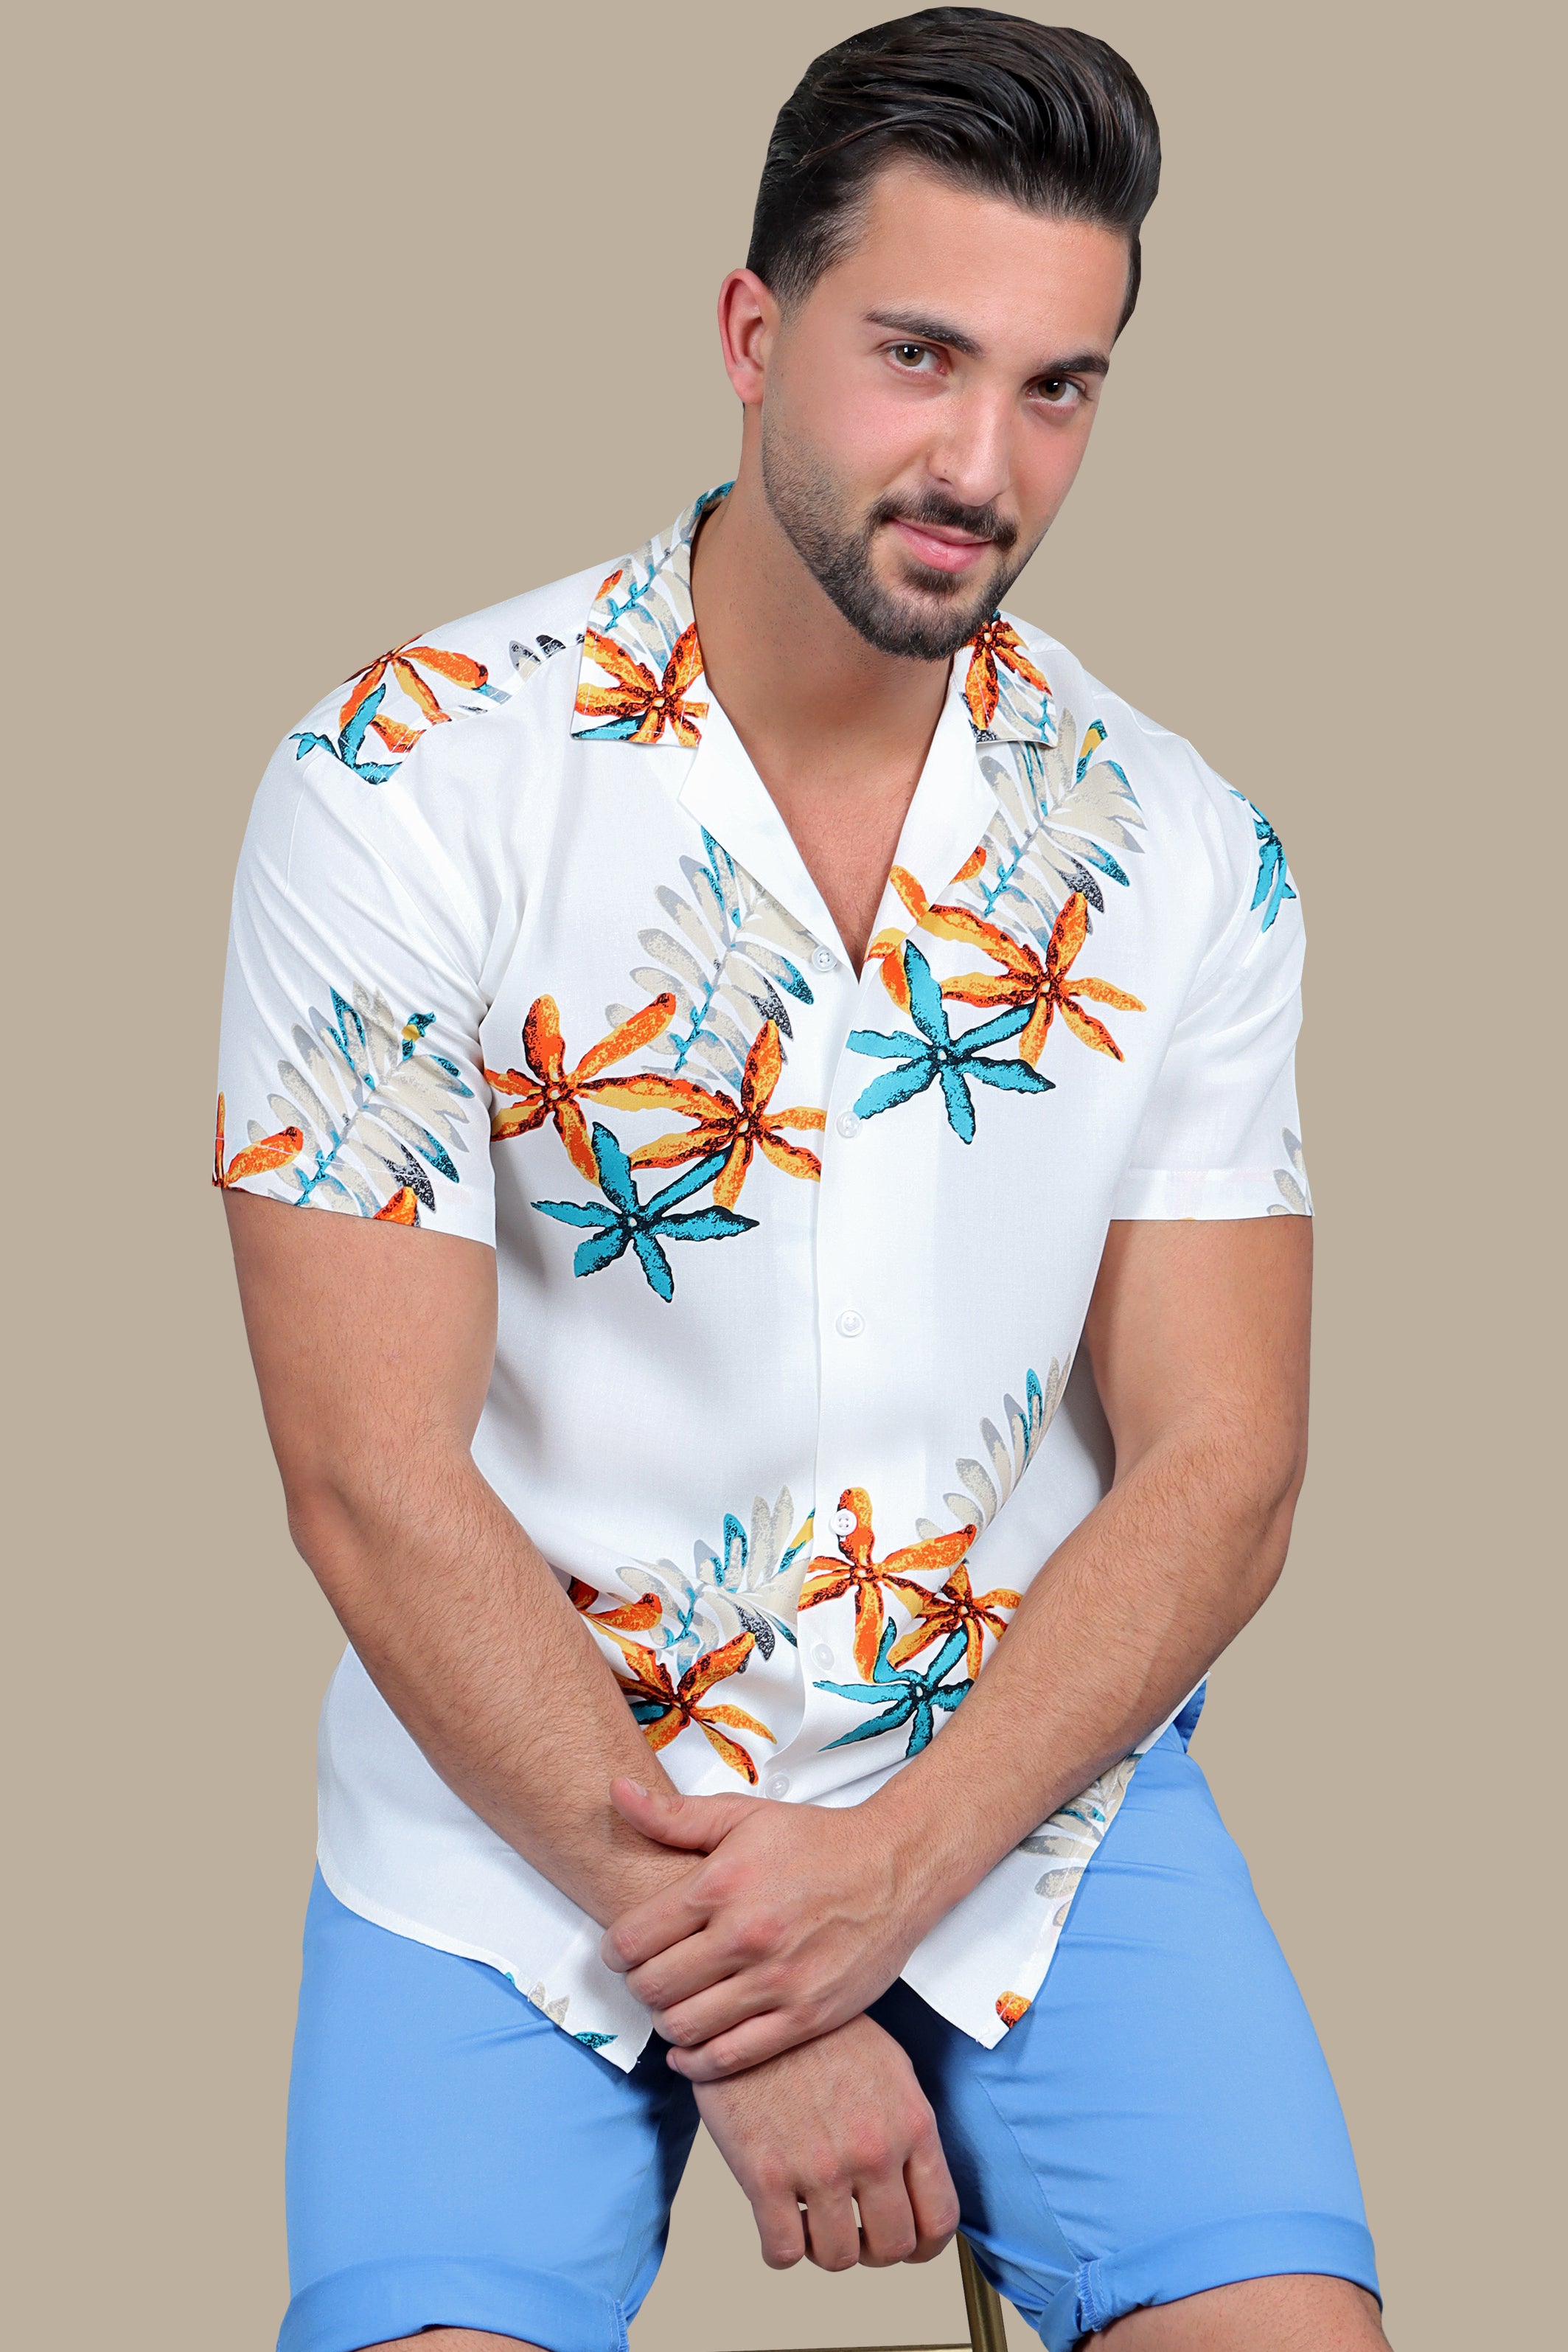 Starry Shores: White Hawaii Shirt with 3 Stars Print